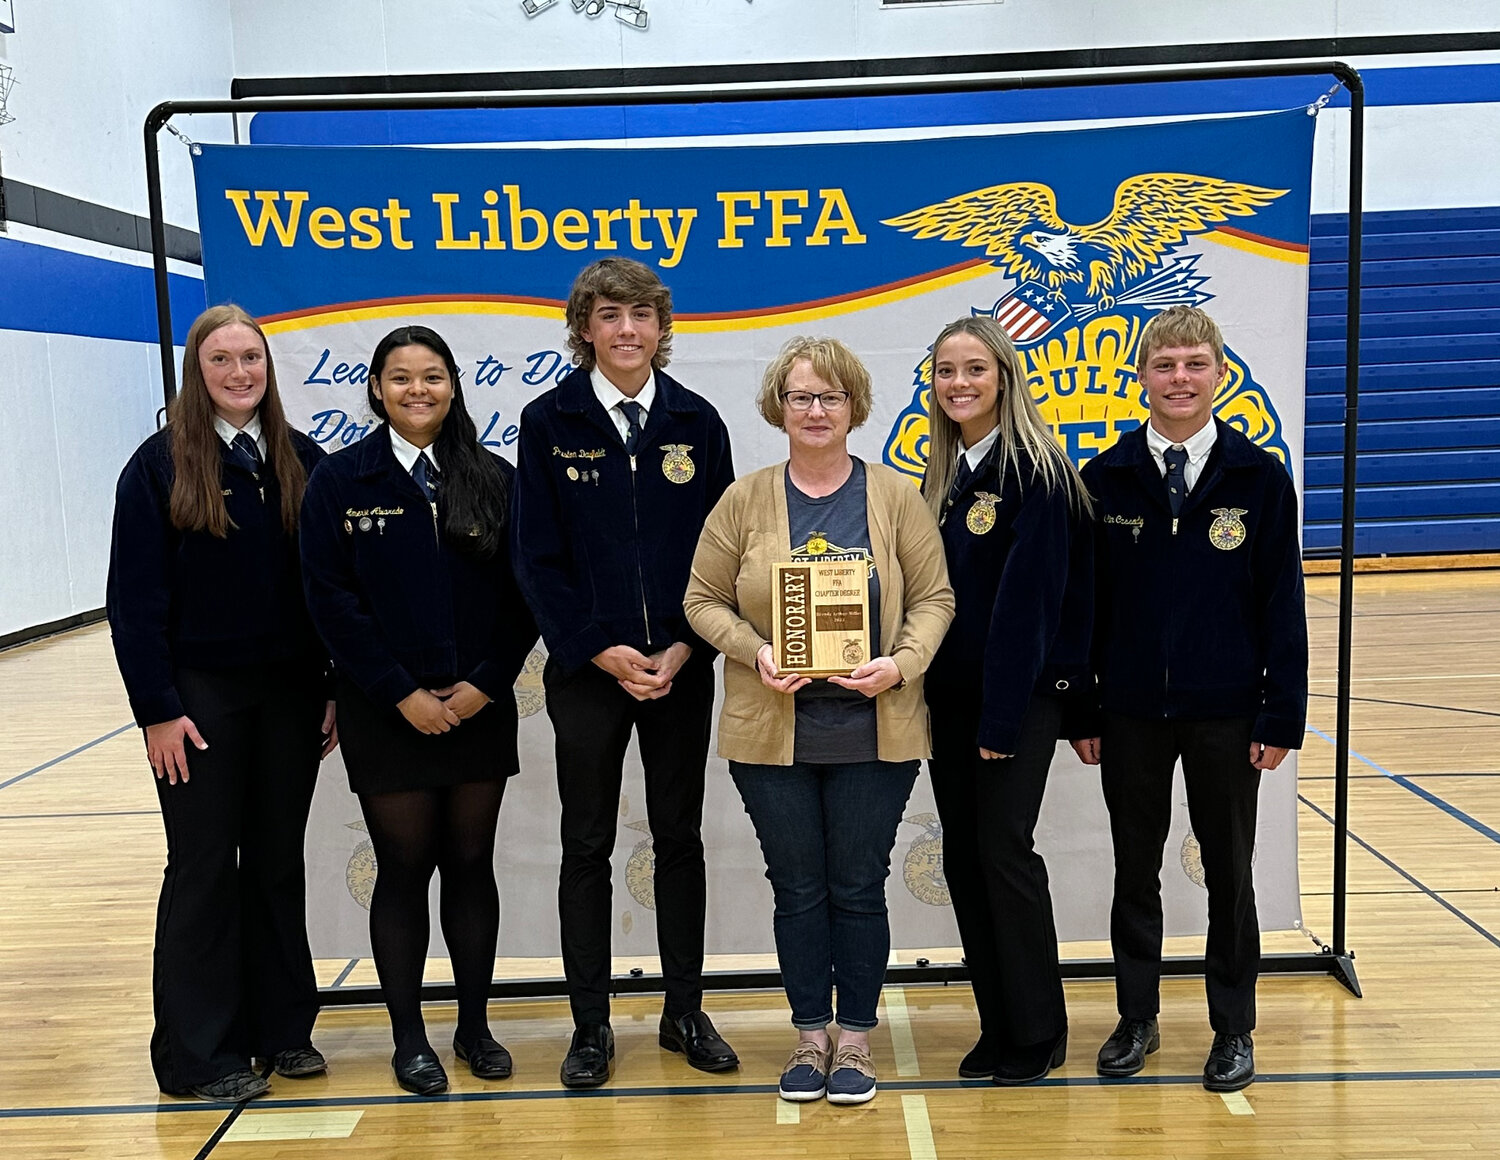 Pictured from left are Addyson Lehman, Amerie Alvarado, Preston Daufeldt, West Liberty High School Principal Brenda Arthur-MIller, Brooklyn Buysse and Collin Cassady during the FFA Awards Banquest last week. Arthur-Miller was inducted as an "honorary member" and celebrated for her state award.